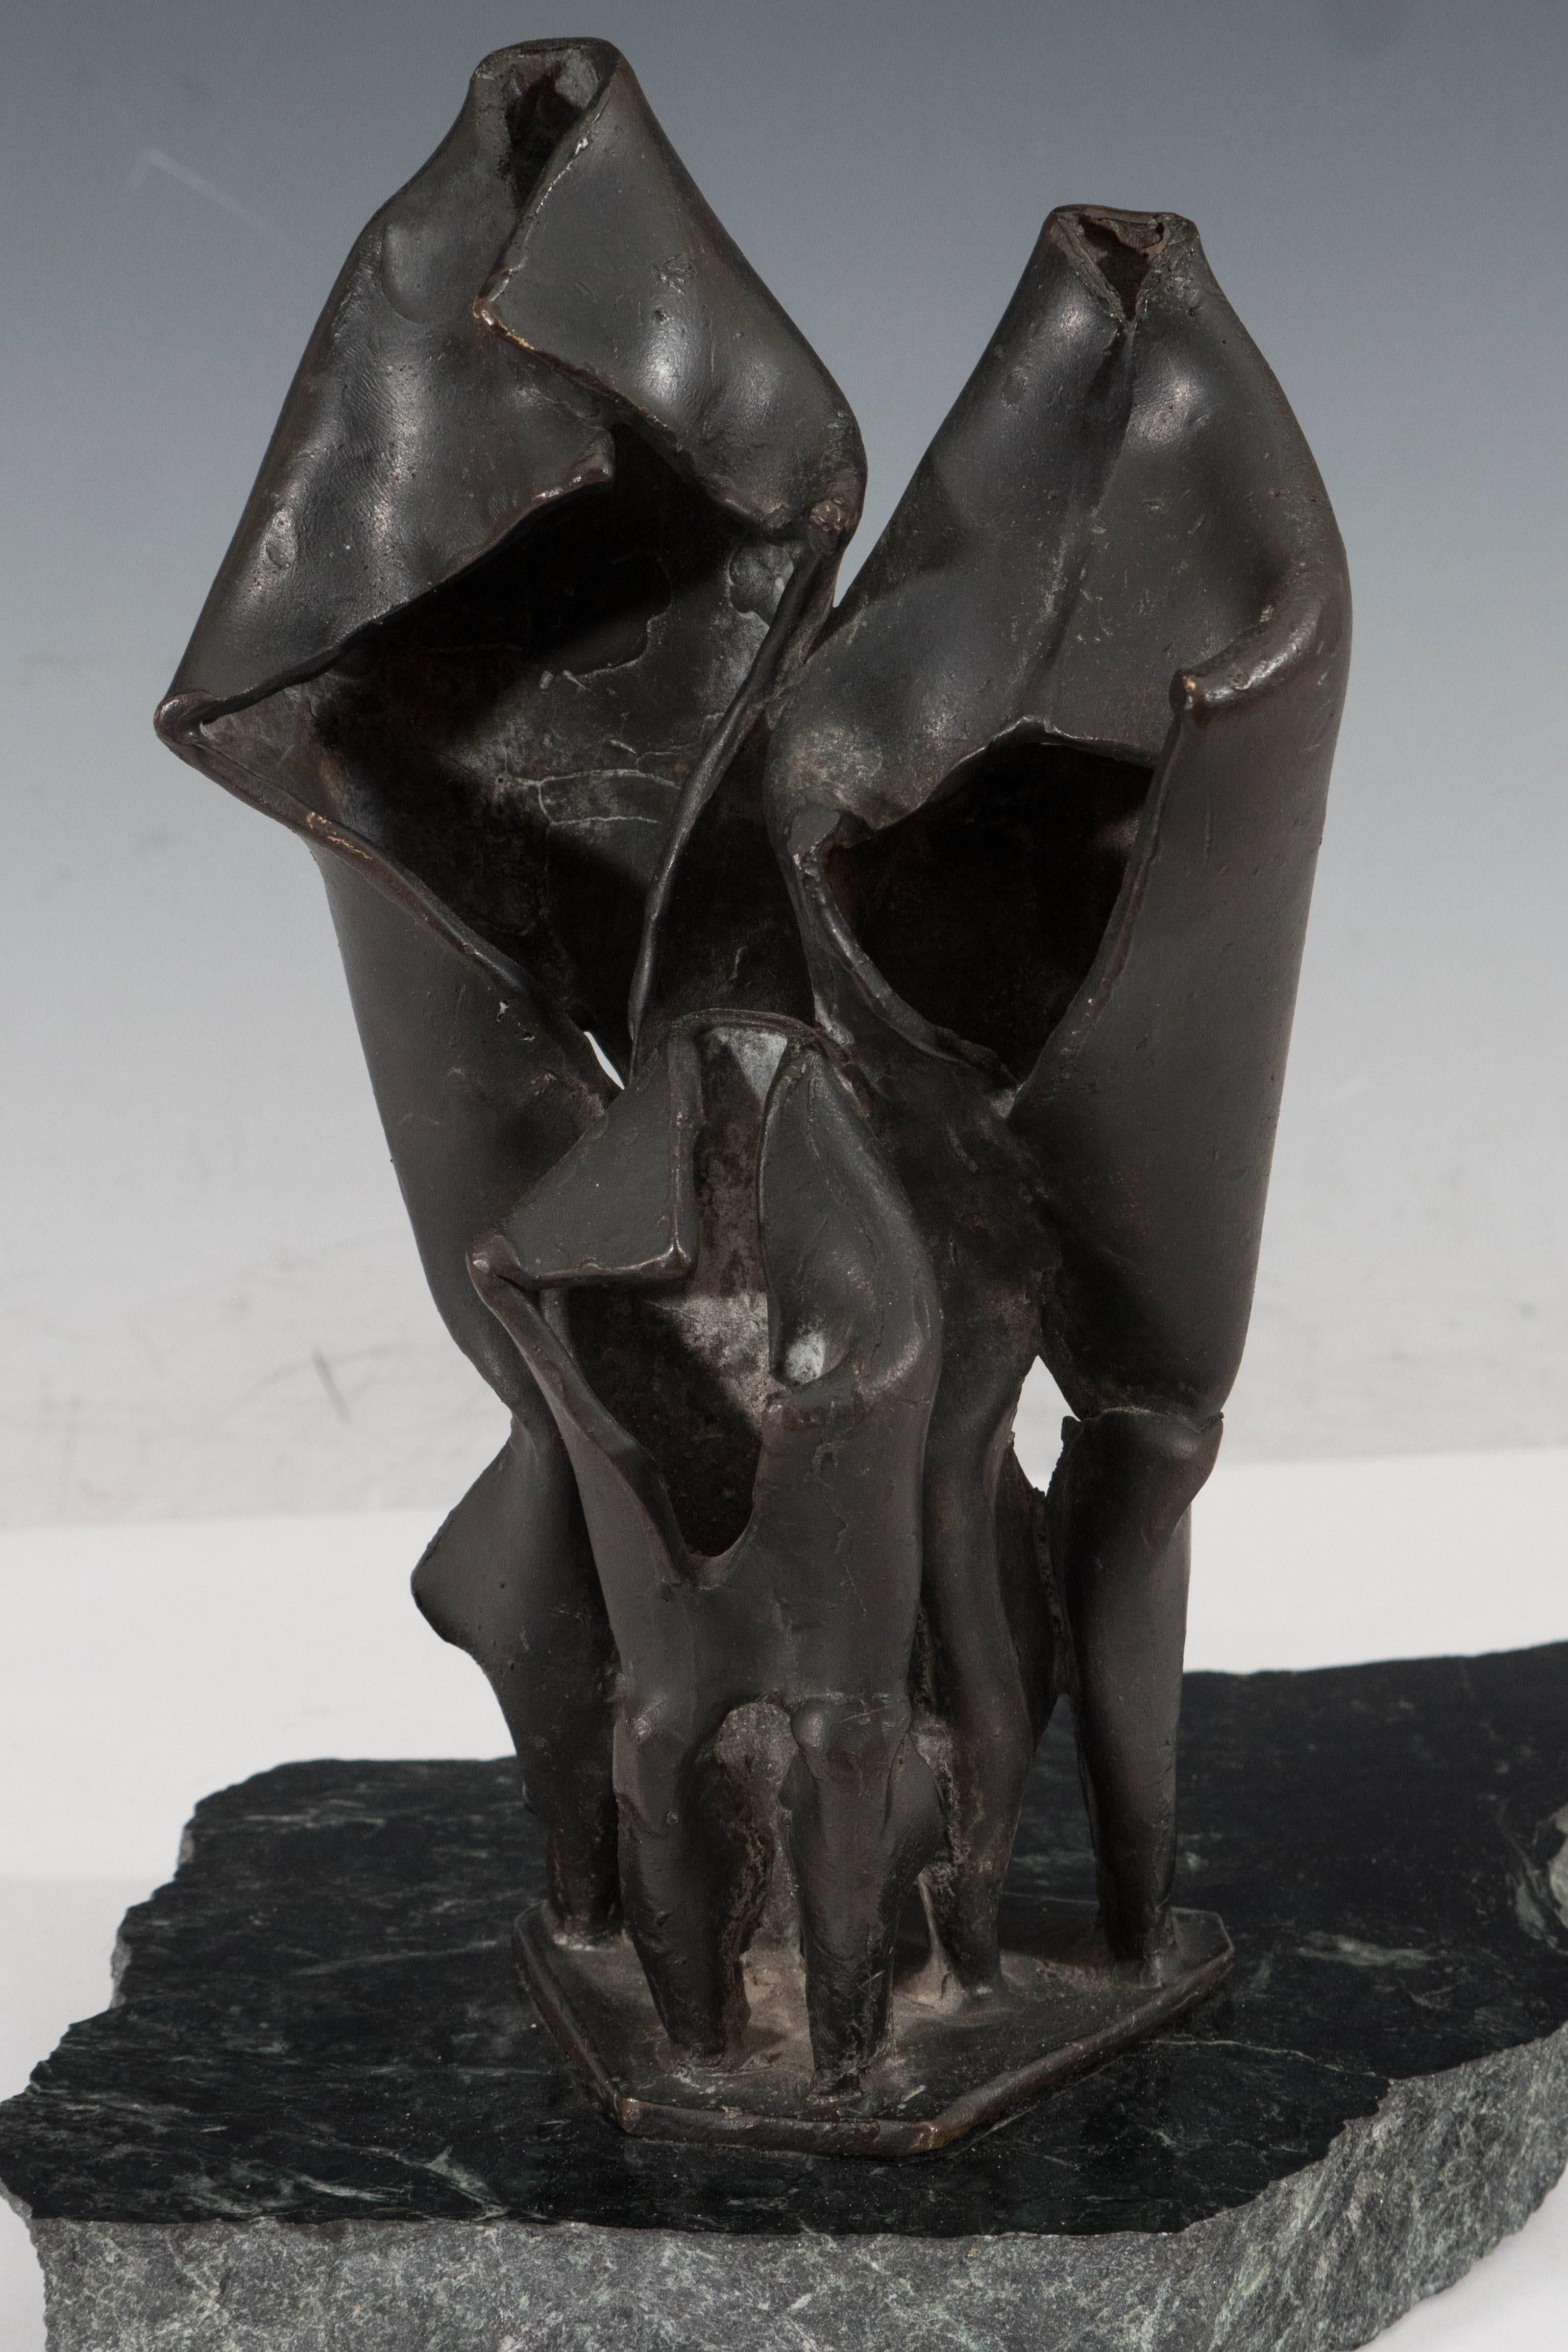 A vintage Brutalist style abstract sculpture, produced by an unknown artist, in patinated bronze, formed into three shapes resembling figures, mounted off-center on a raw edge black marble base. The sculpture remains in good condition, with age